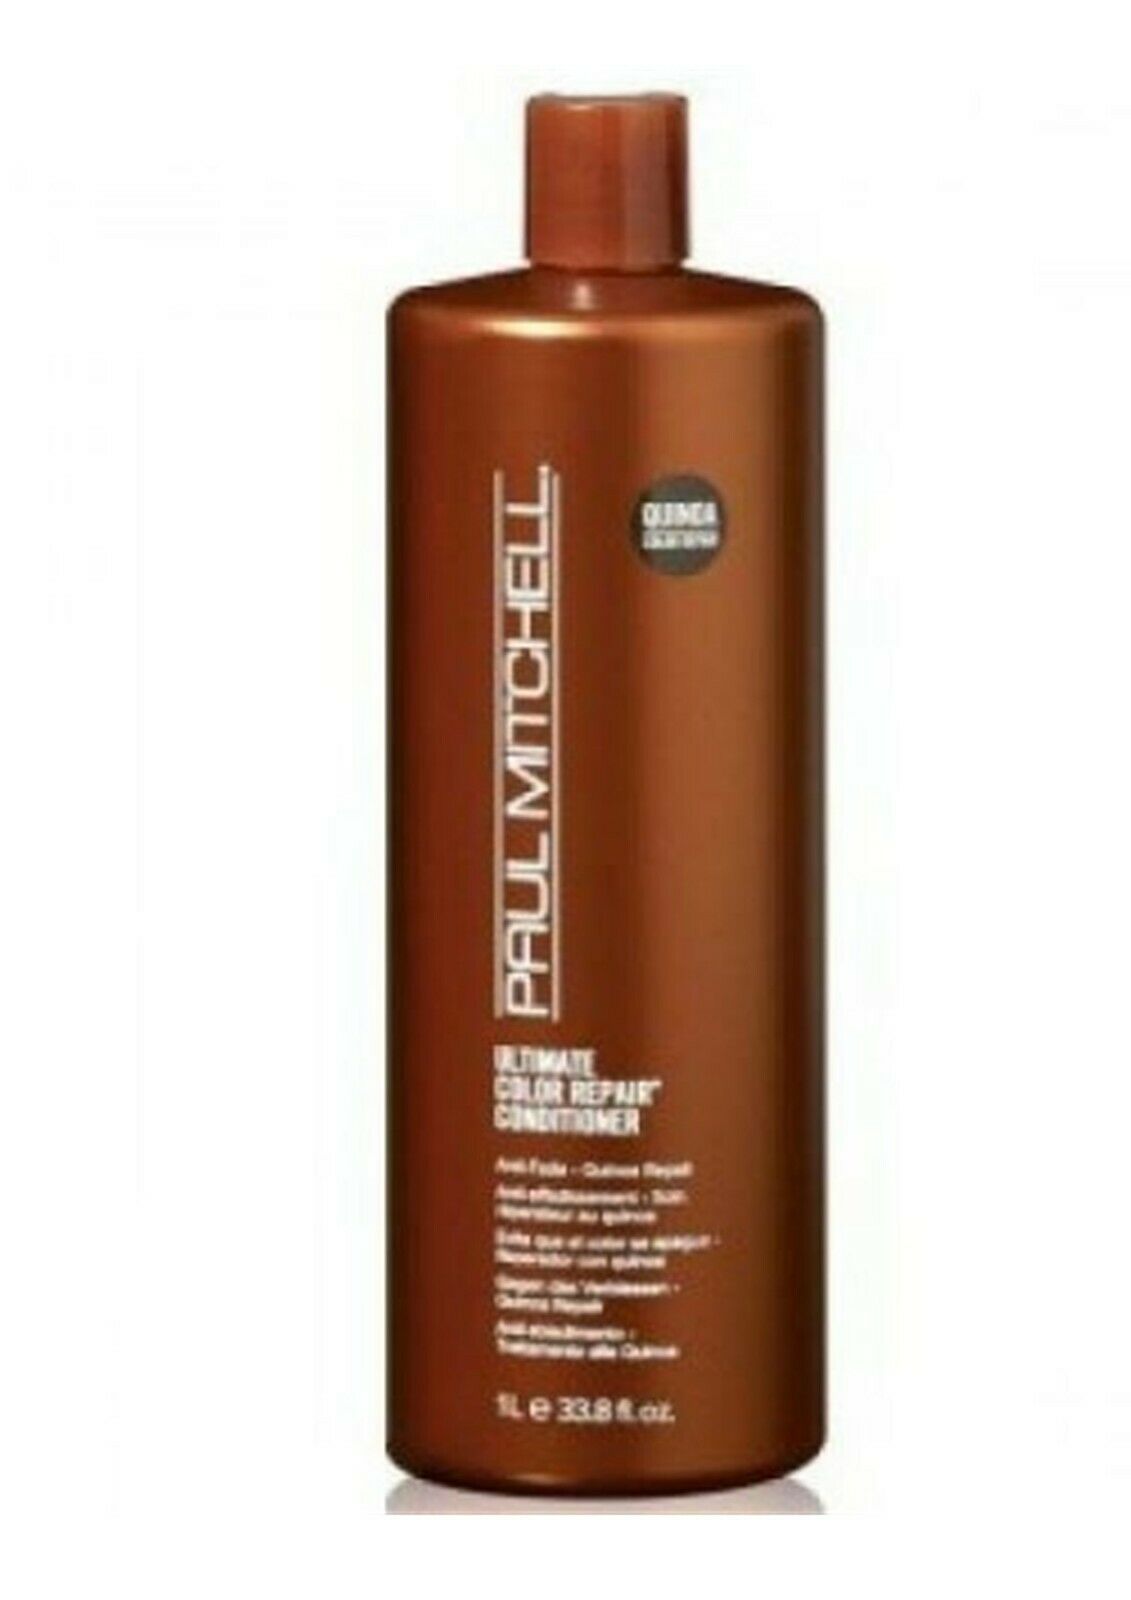 iaahhaircare,Paul Mitchell Ultimate Color Repair Conditioner 1000ml,Shampoos & Conditioners,Paul Mitchell